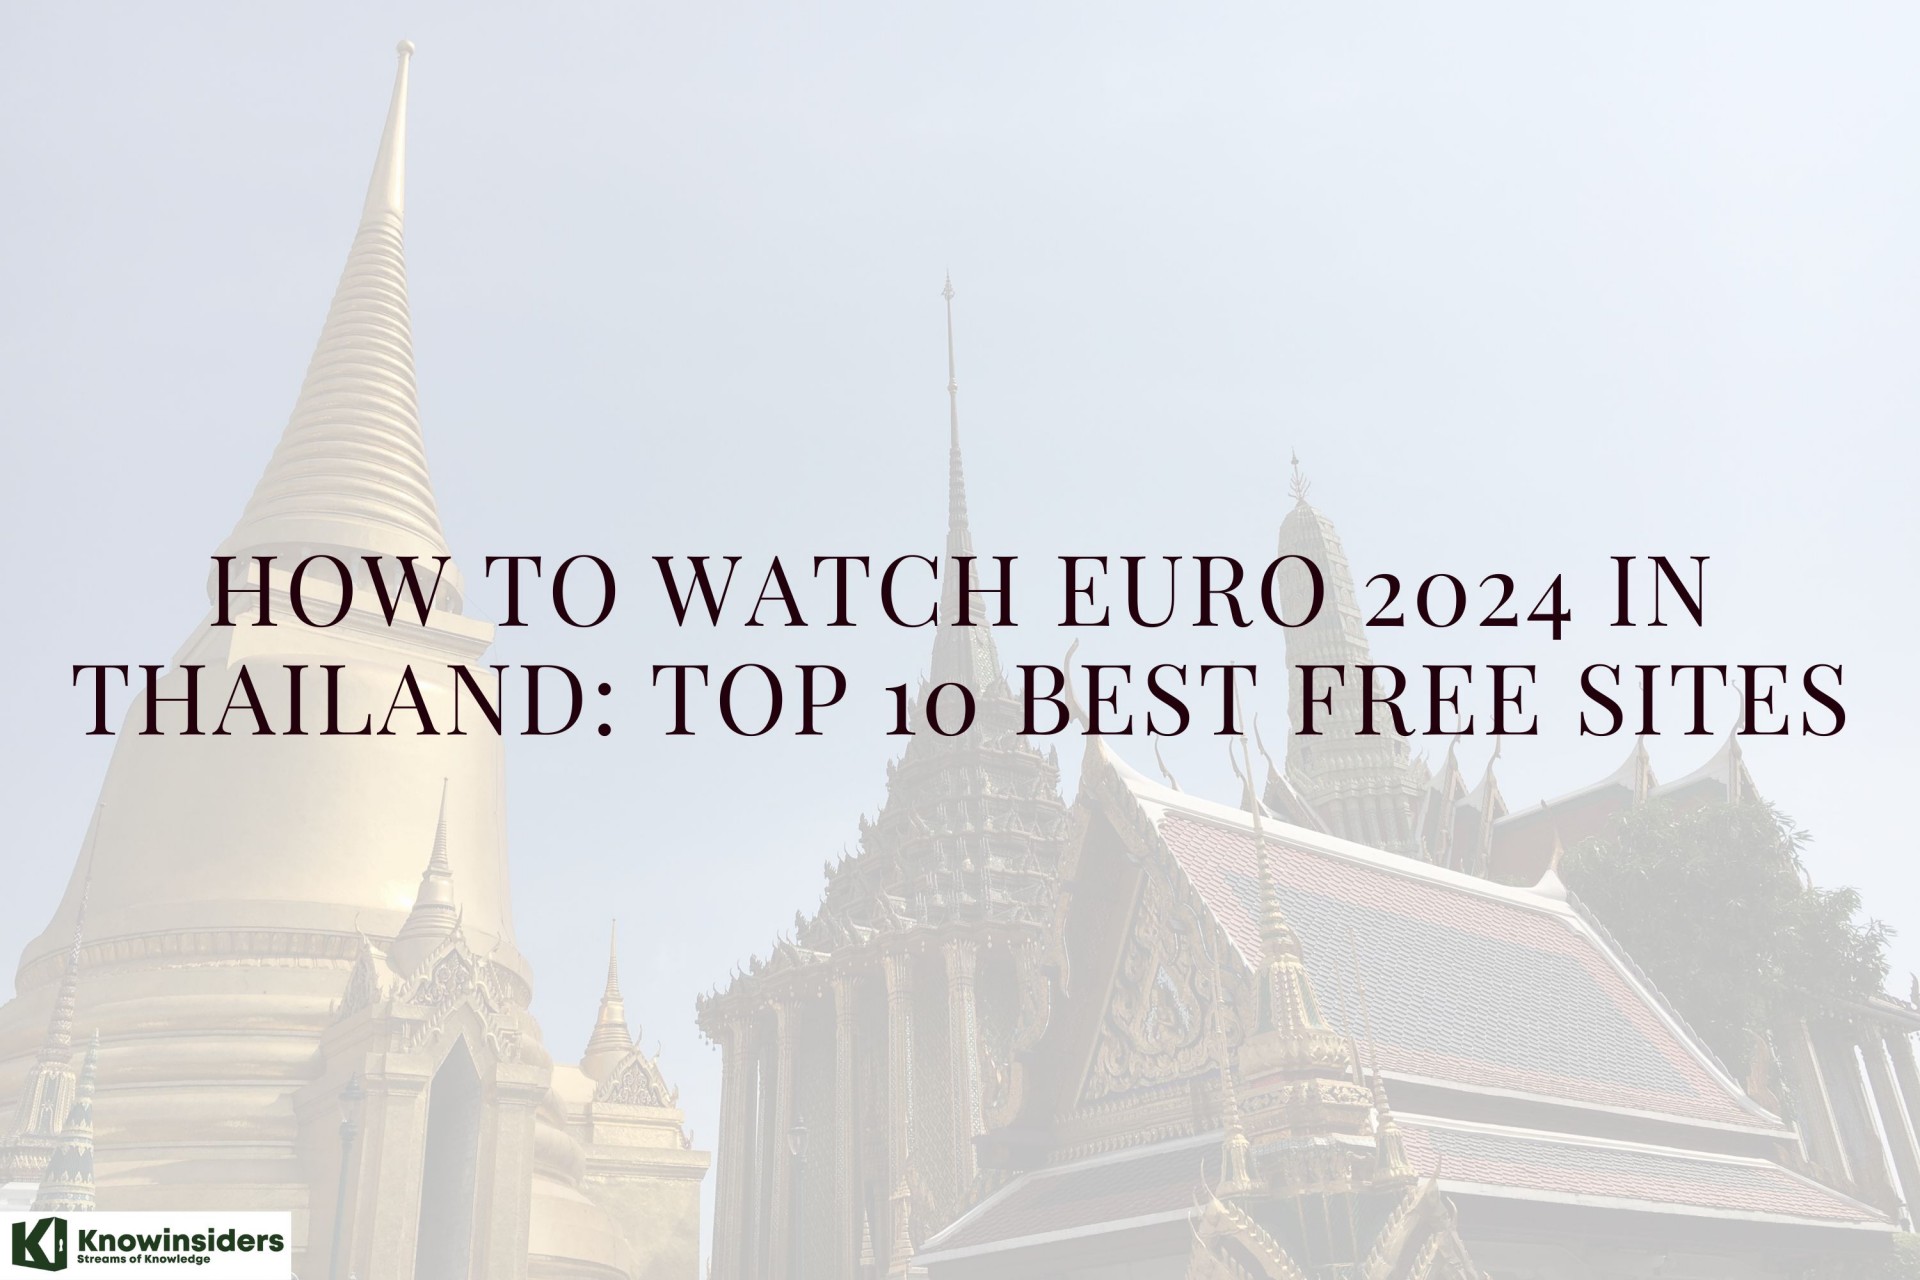 10 Best FREE Sites to Watch Euro 2024 in Thailand (Without Cable)